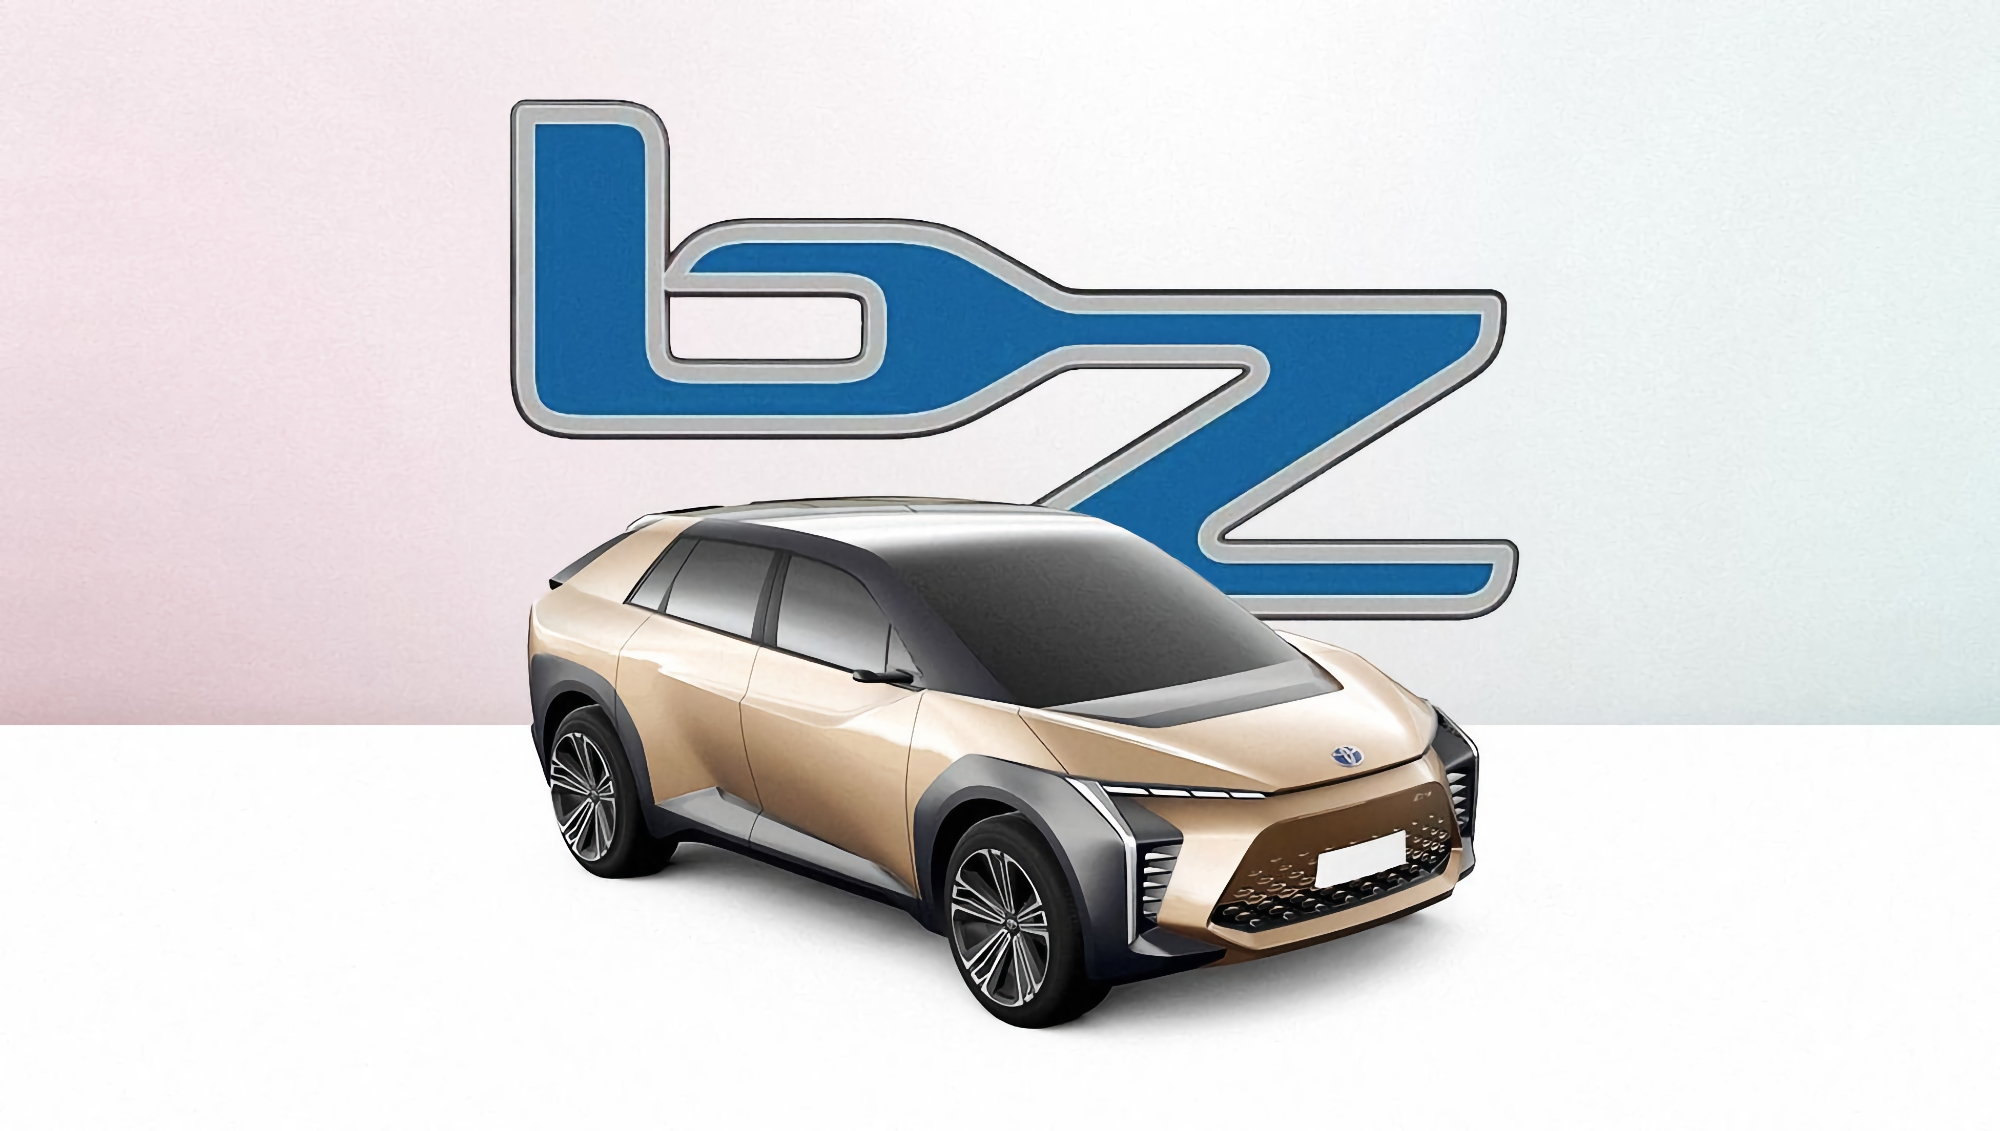 Rumor: Toyota will show the first electric car Beyond Zero at the Shanghai auto show, which will get charged to 100% in 10 minutes